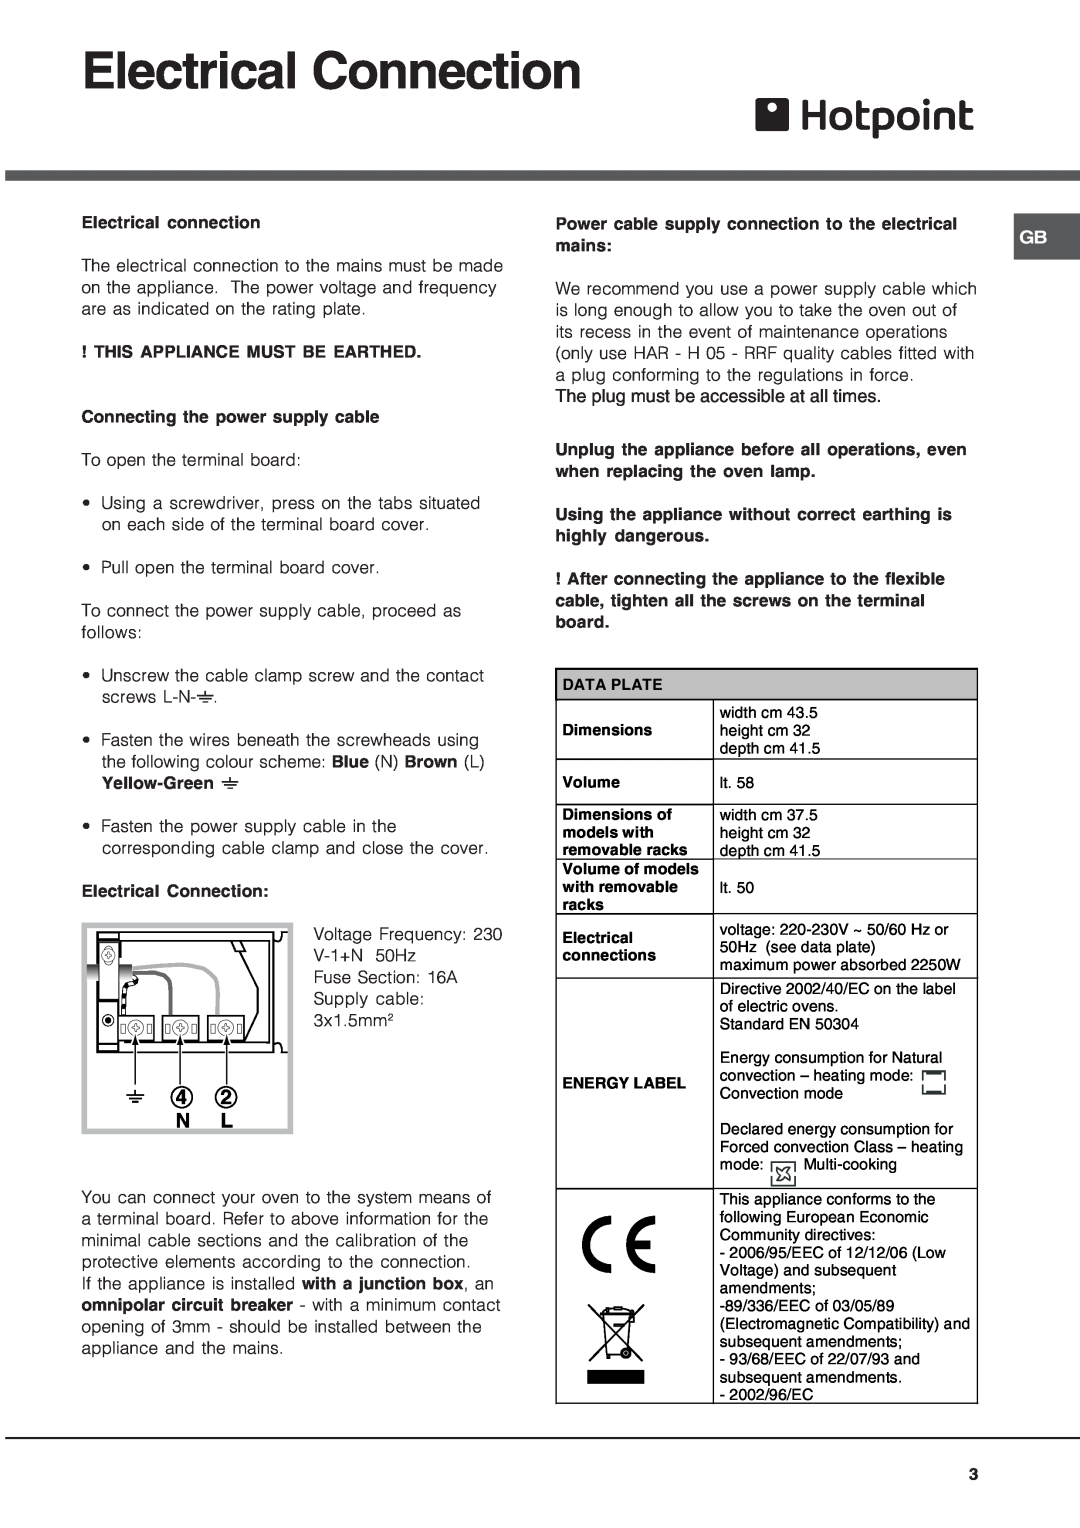 Hotpoint SN56EX operating instructions Electrical Connection, 4 2 N L, The plug must be accessible at all times 